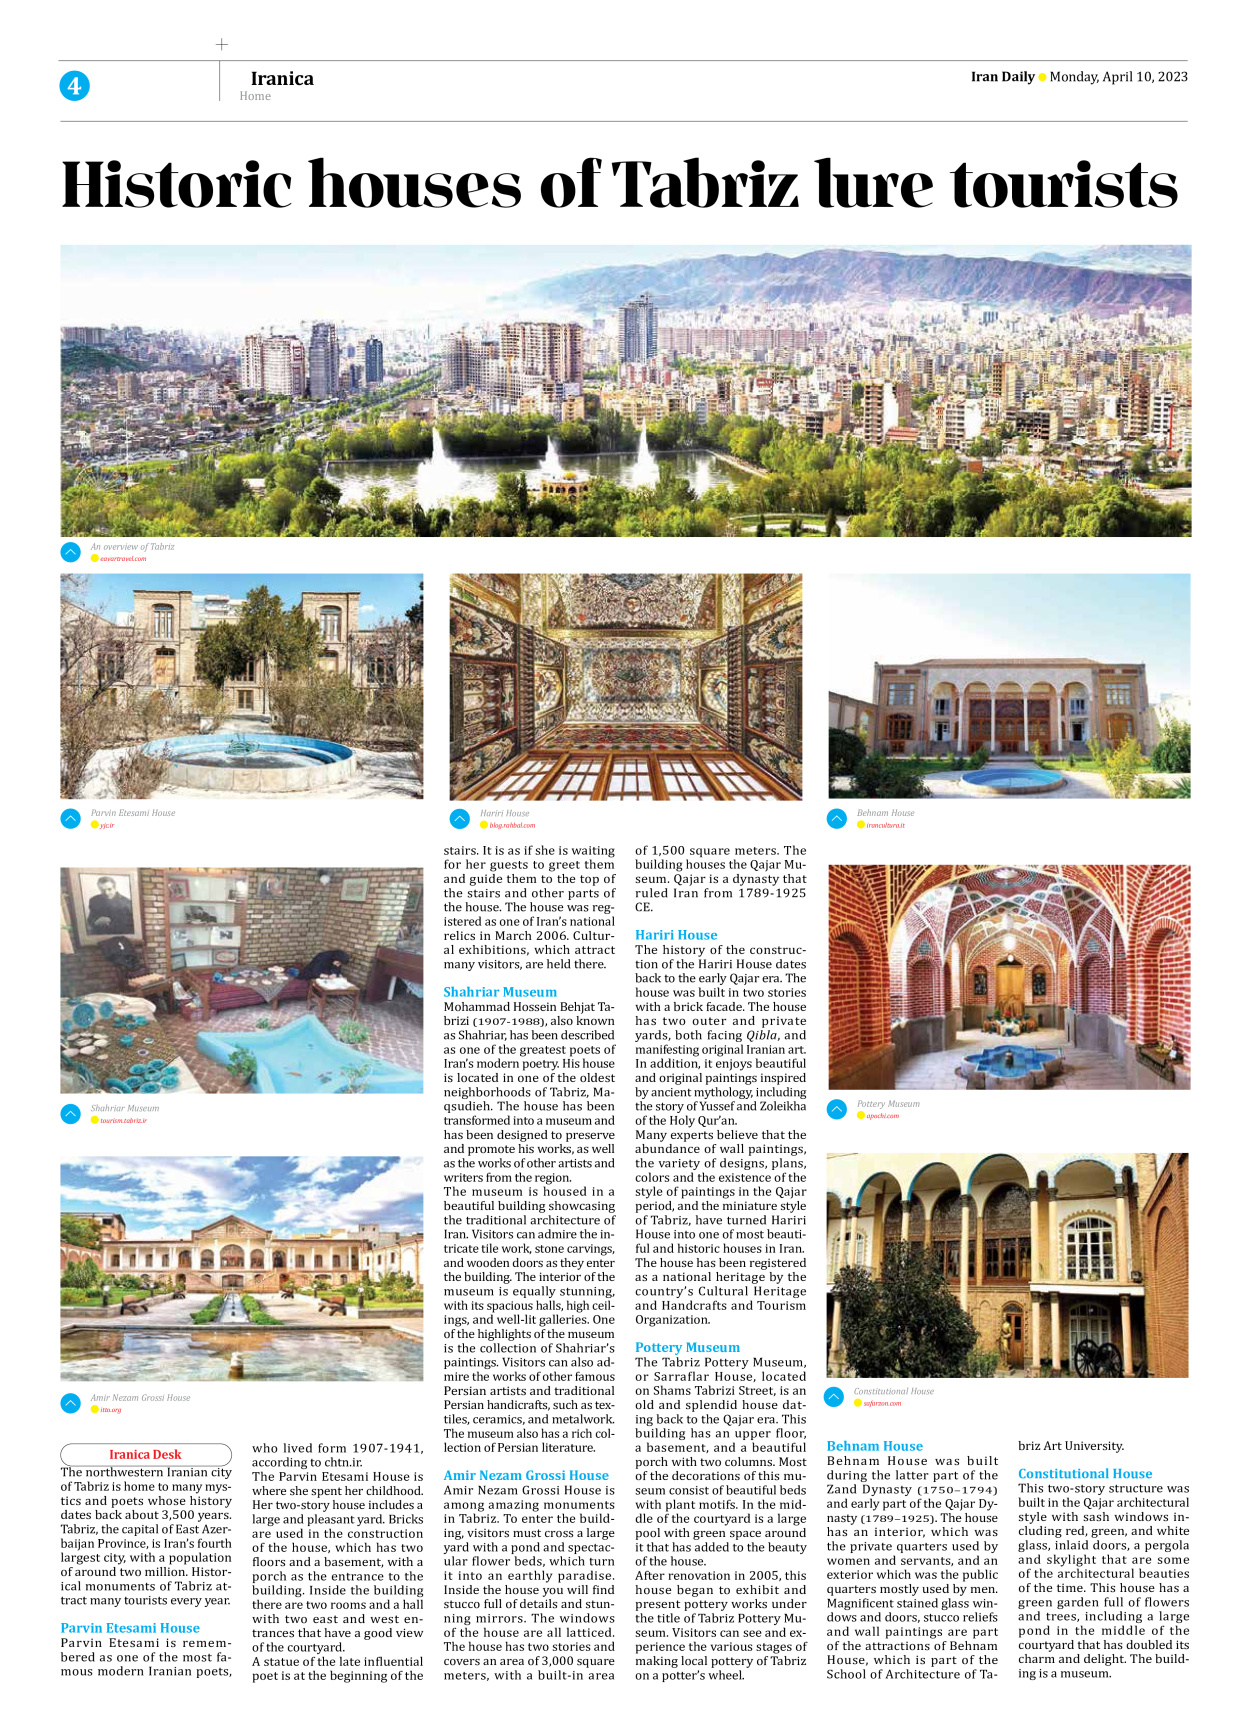 Iran Daily - Number Seven Thousand Two Hundred and Sixty Six - 10 April 2023 - Page 4